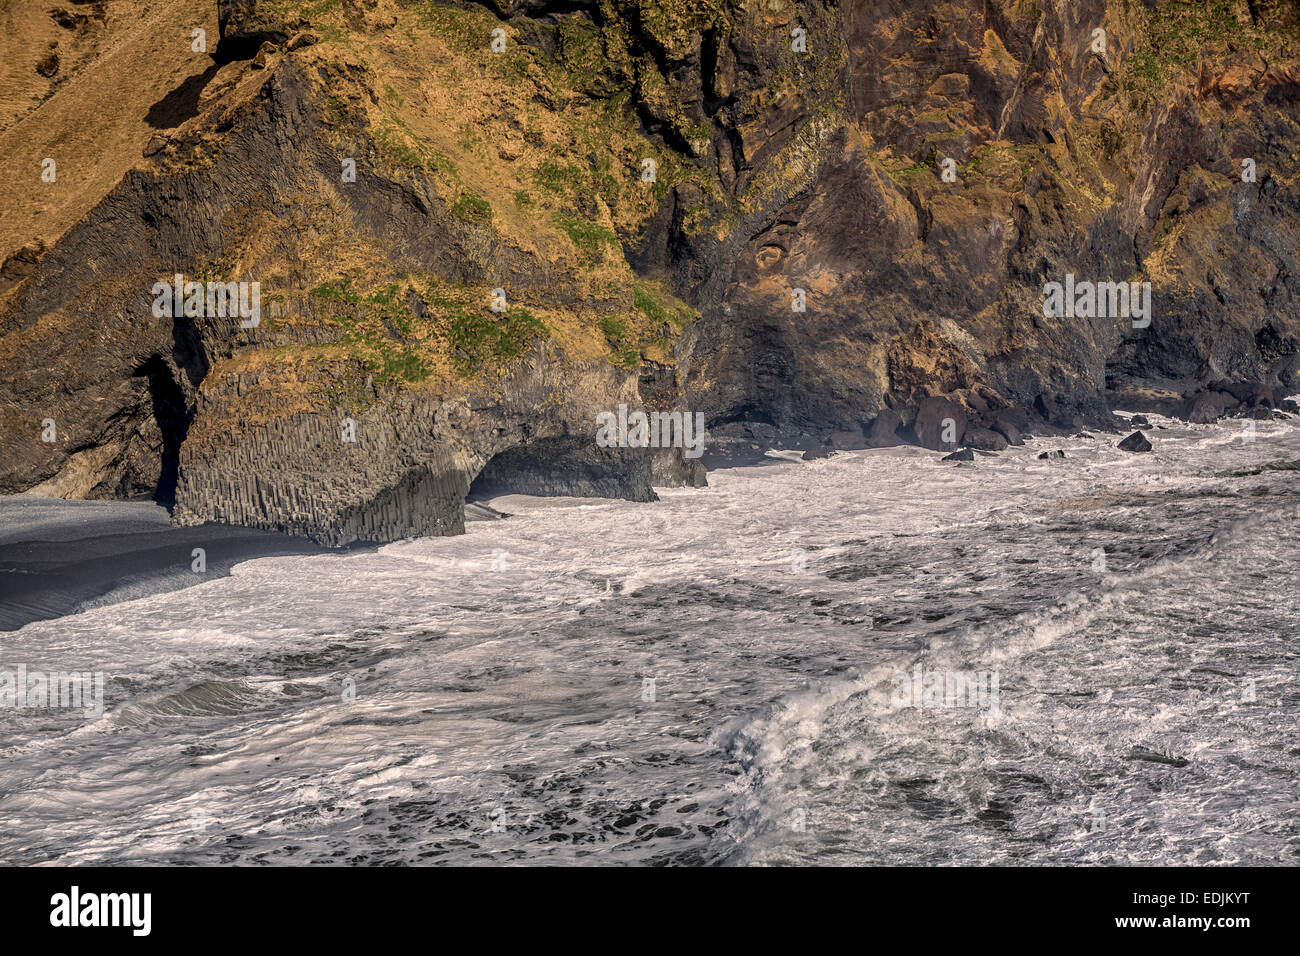 Details of rock and caves on the coast, Reynisfjara Beach, Iceland. Stock Photo